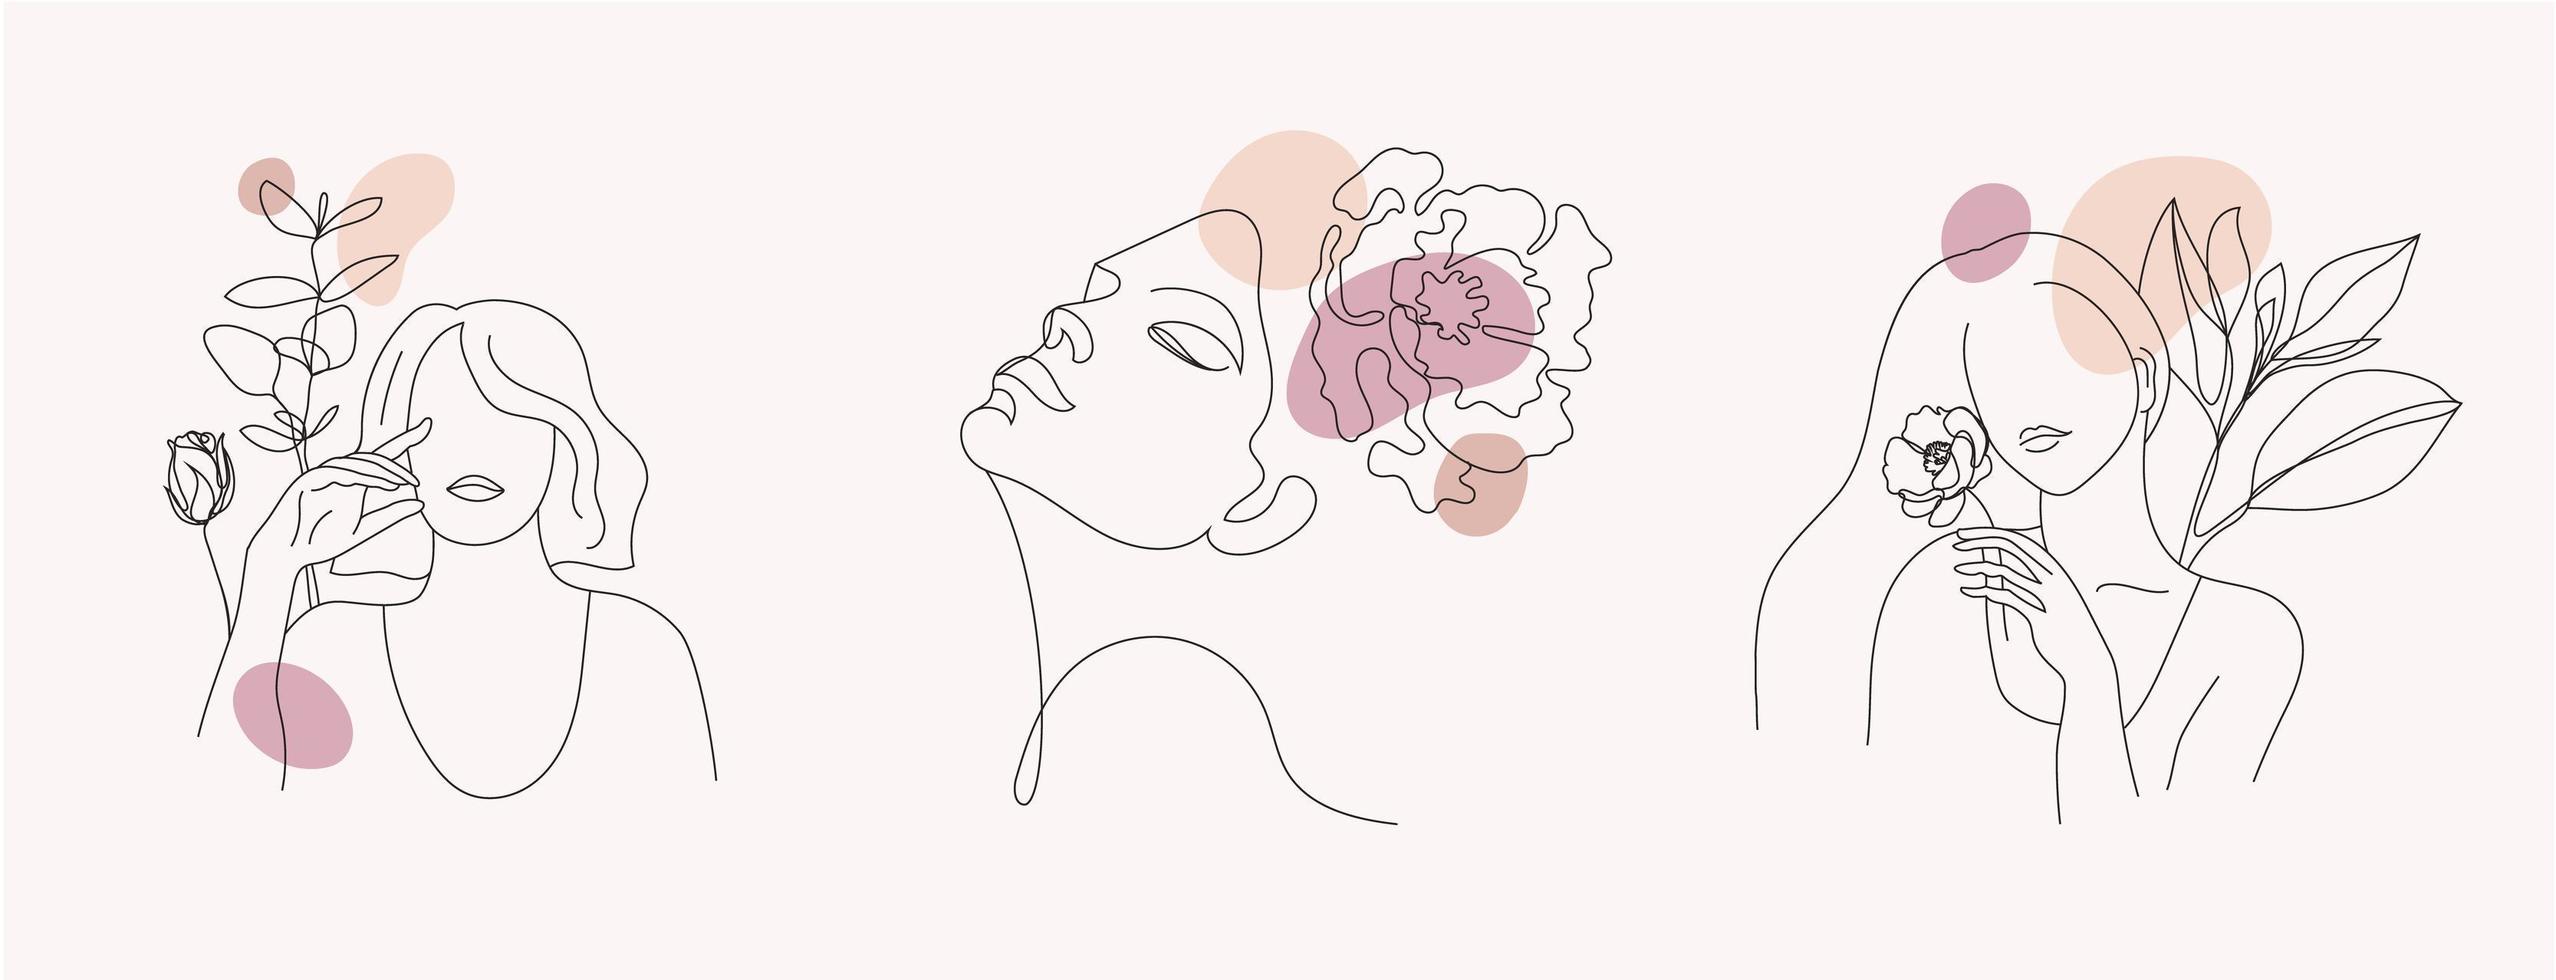 Vector set of women faces, line art illustrations, logos with flowers and leaves, feminine nature concept. Use for prints, tattoos, posters, textile, logotypes, cards etc. Beautiful women faces.